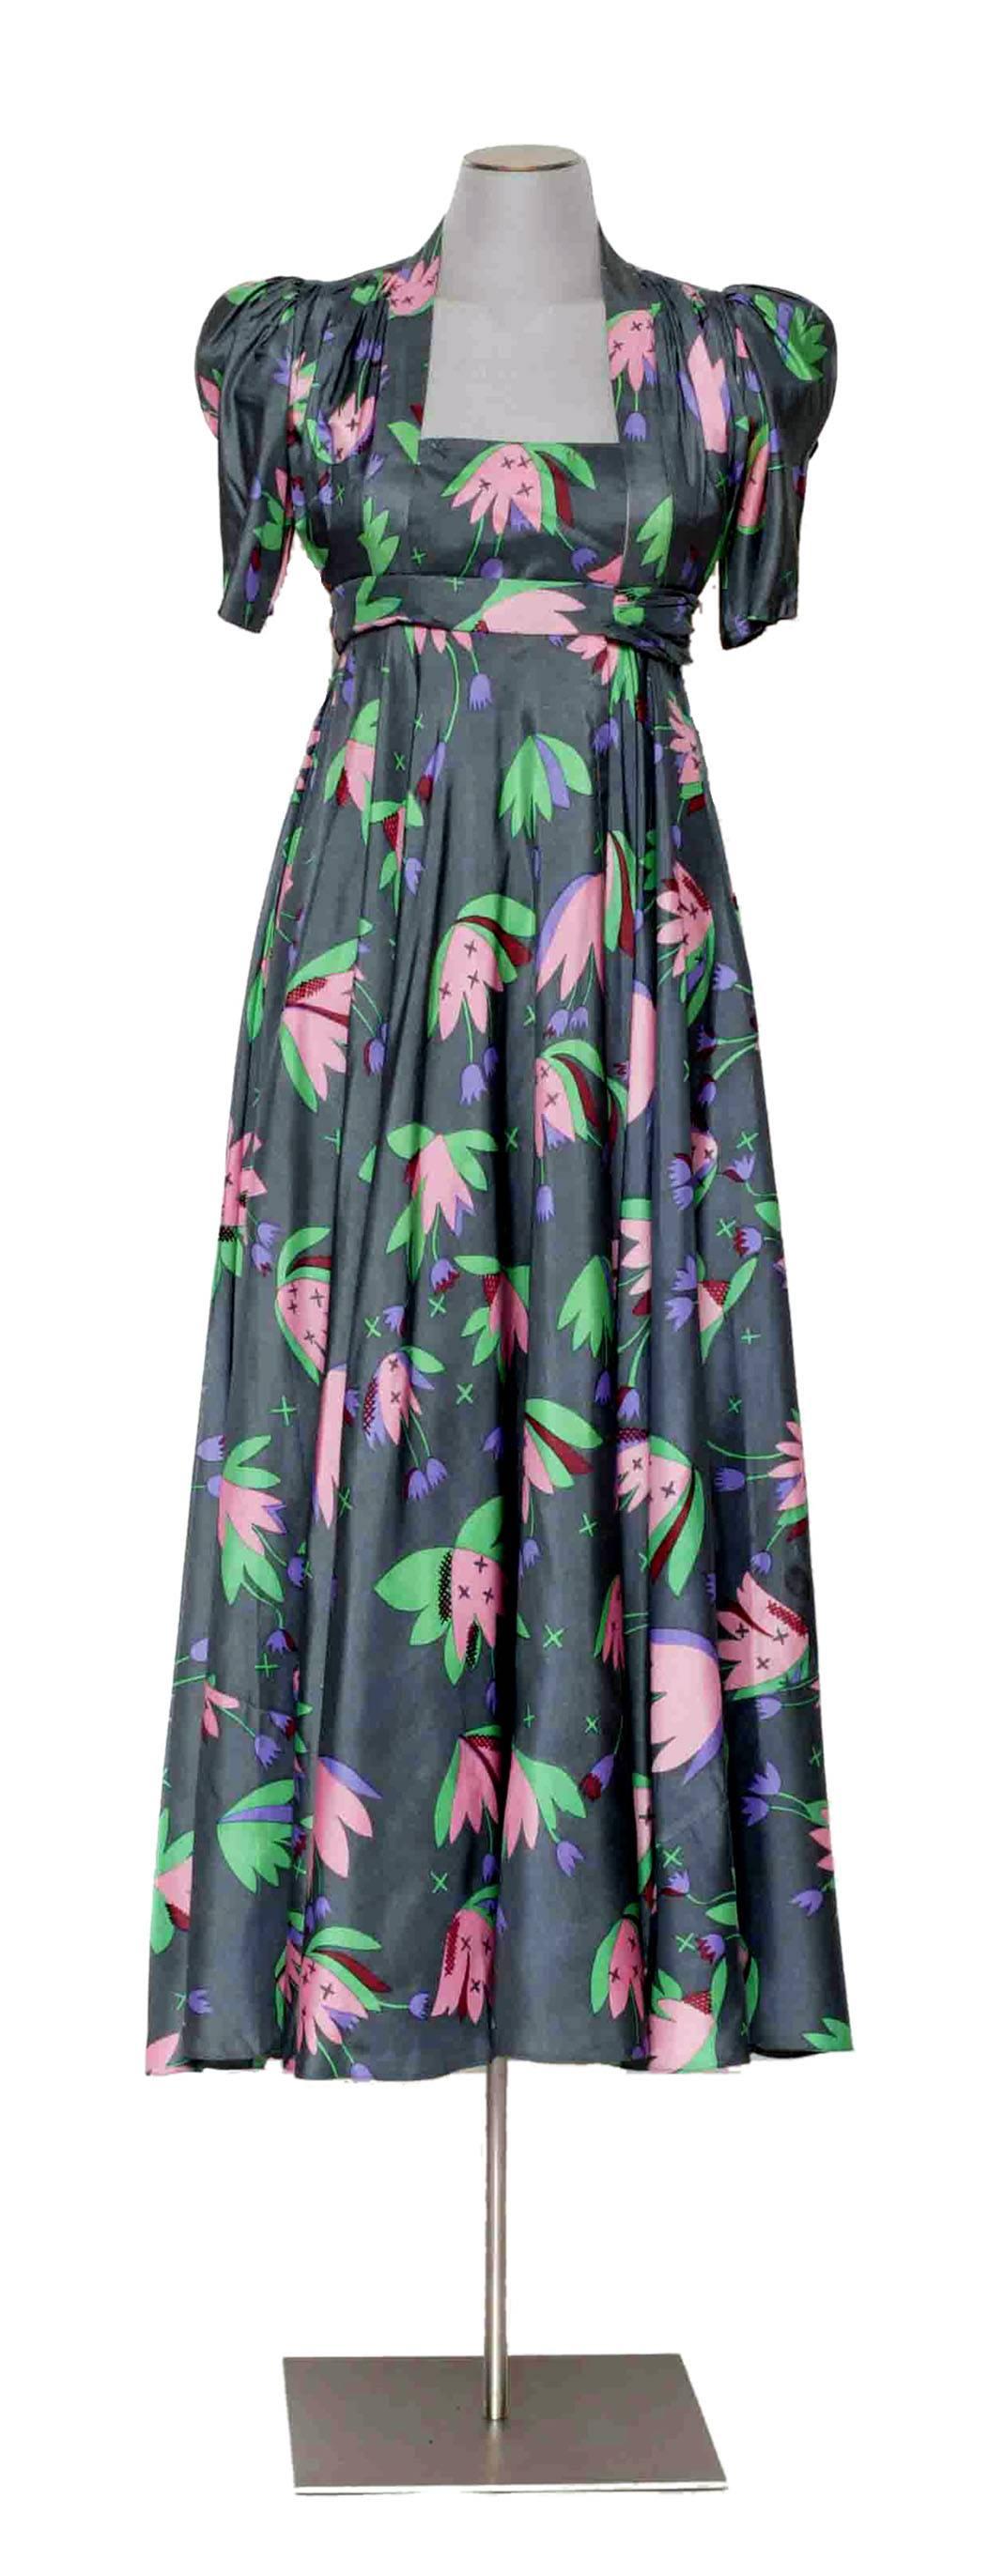 The tulip print wrap dress by Ossie Clark thus not need any introduction, it is one of the most important piece ever made by Ossie Clark in collaboration with Celia Birtwell.
Amazing gray silk ground with whimsical pink & purple tulip print, short